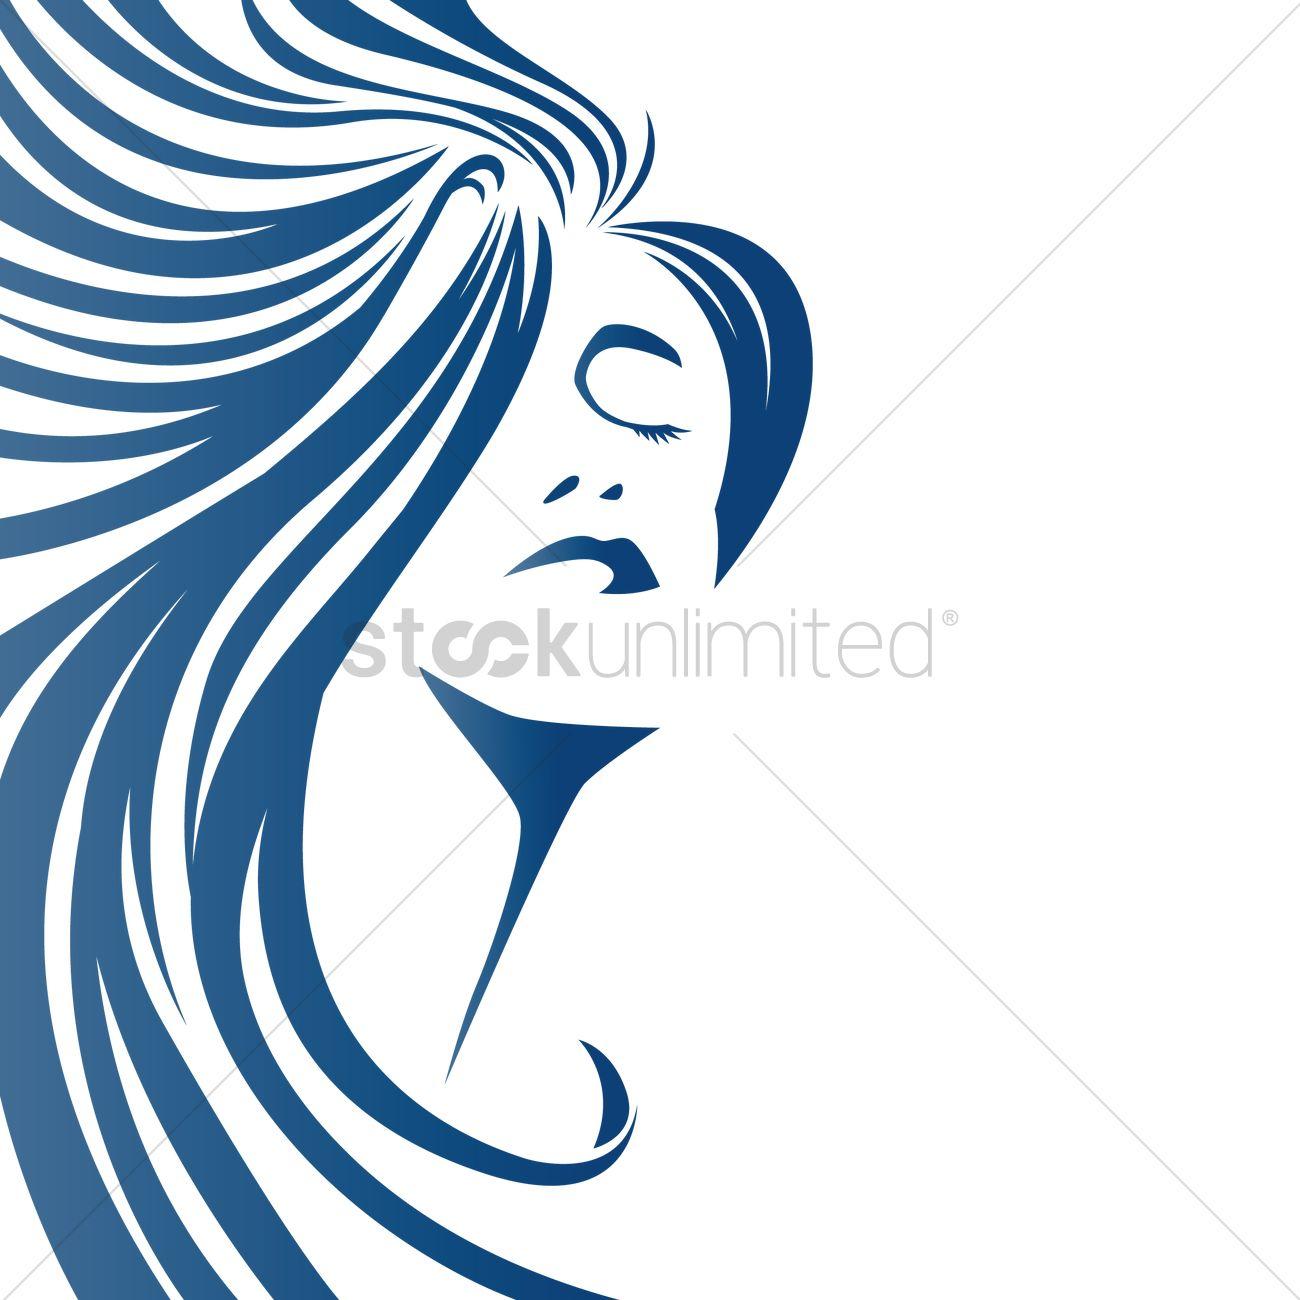 Lady with Flowing Hair Logo - Artistic design of woman with flowing hair Vector Image - 1959308 ...